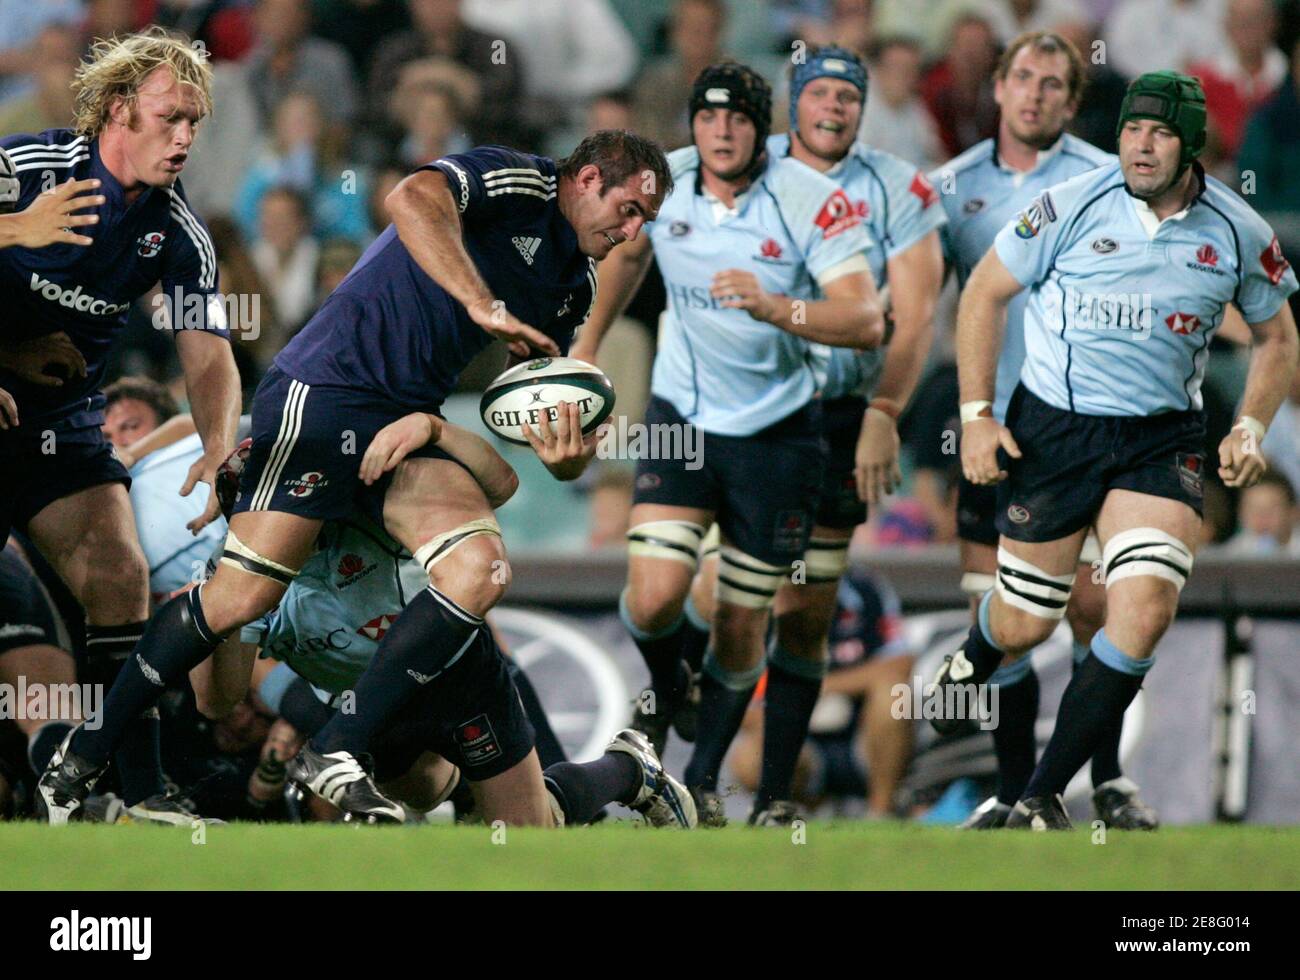 Justin Melck of the Stormers from South Africa (2nd L) is backed up by team mate Schalk Burger (L) as he takes on forwards from the Waratahs of Australia during their Super 14 rugby union match in Sydney March 17, 2007. REUTERS/Will Burgess   (AUSTRALIA) Stock Photo